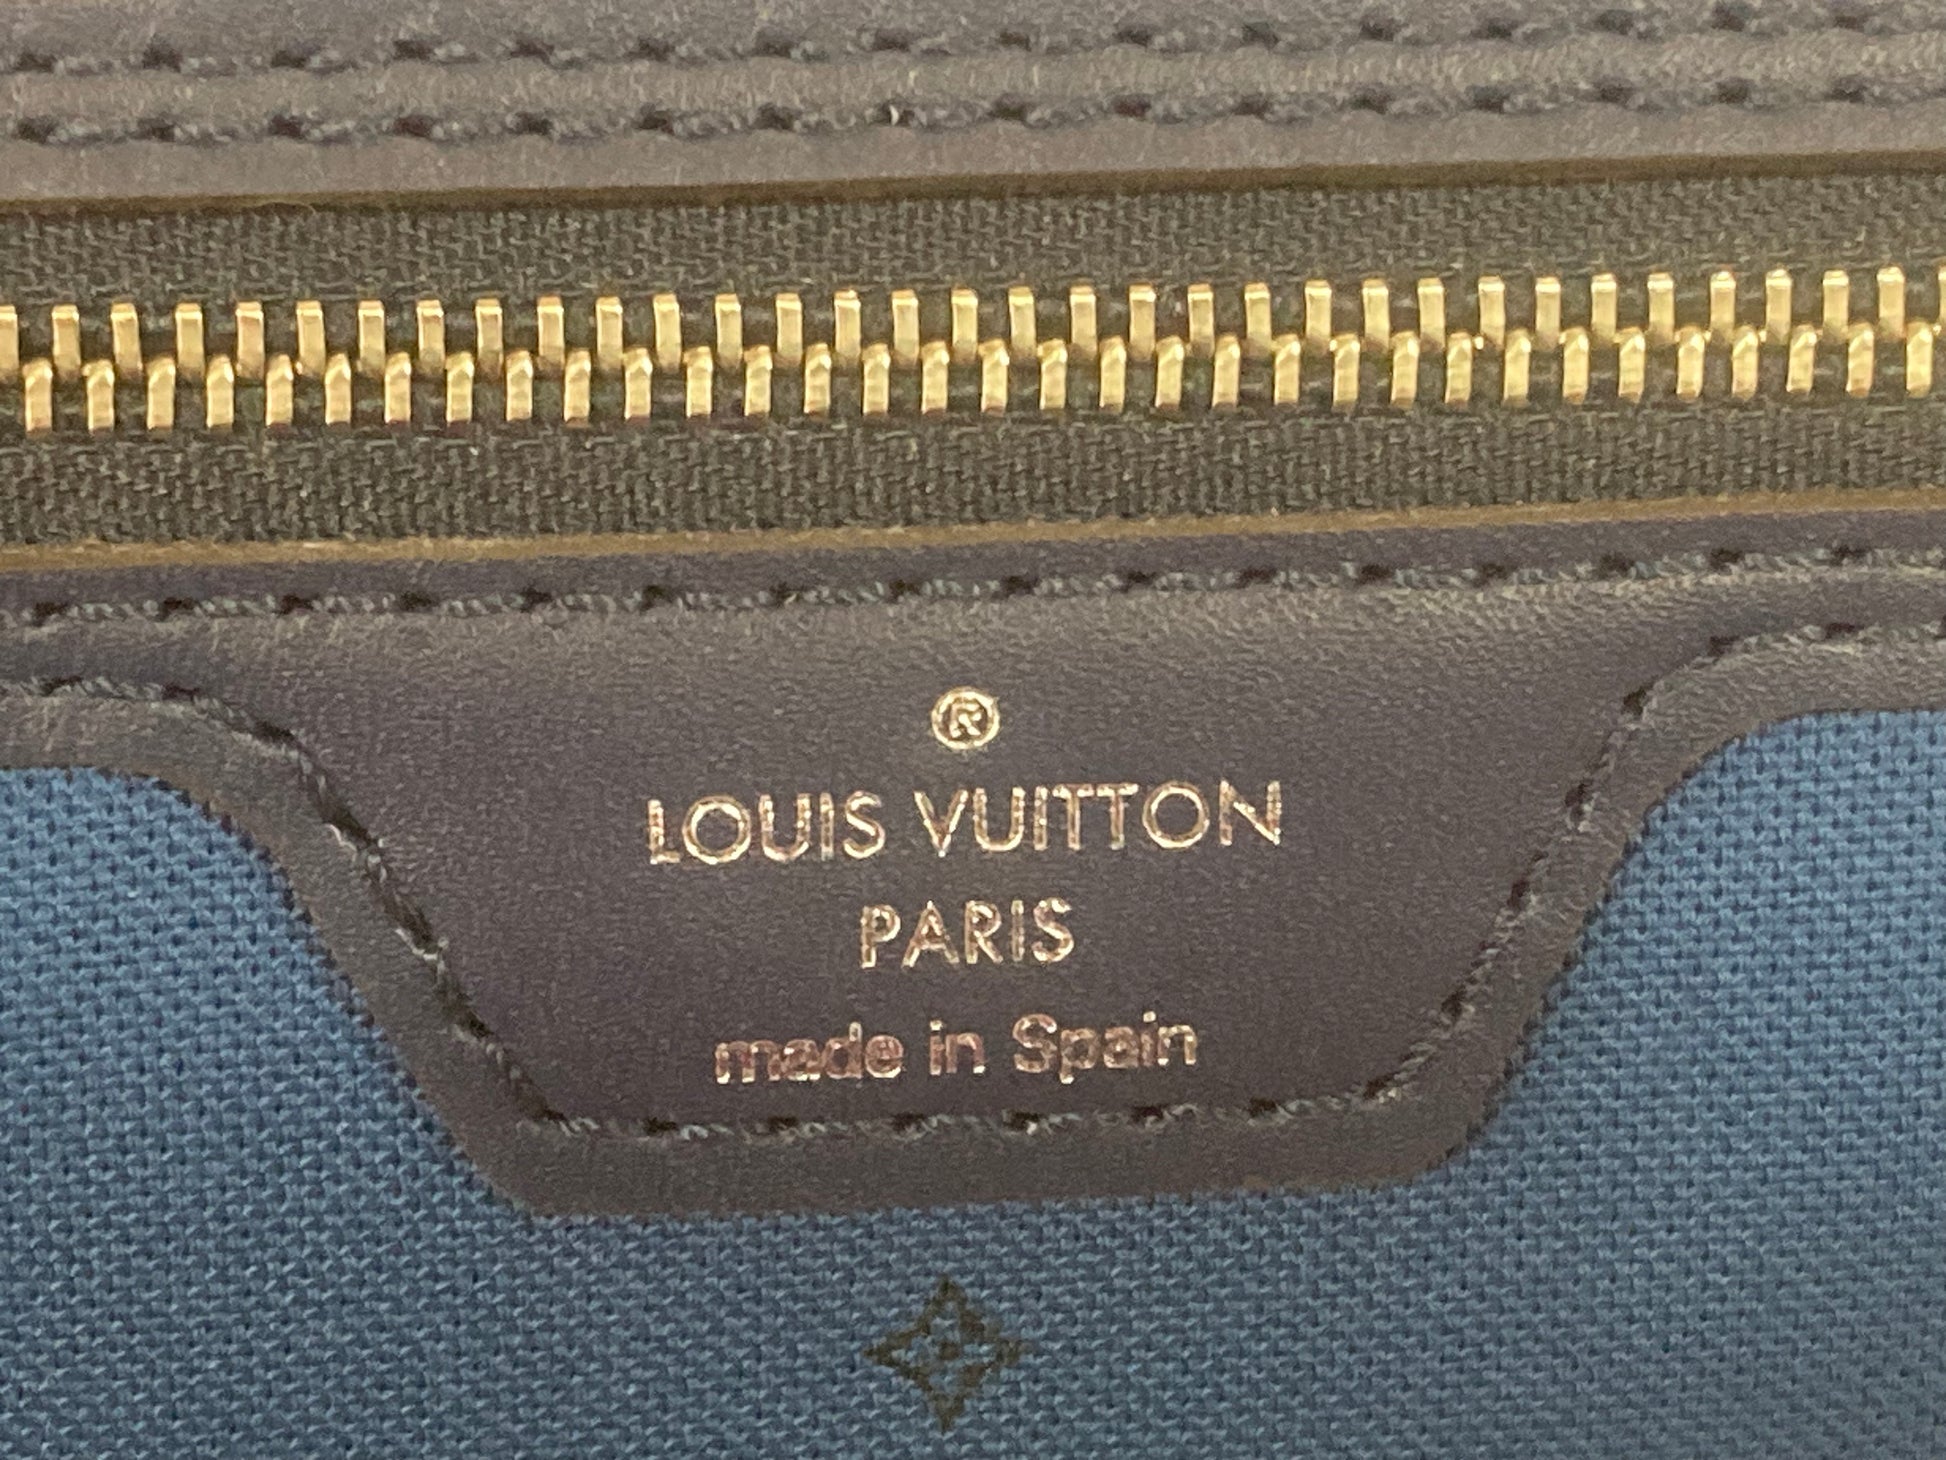 vuitton made in